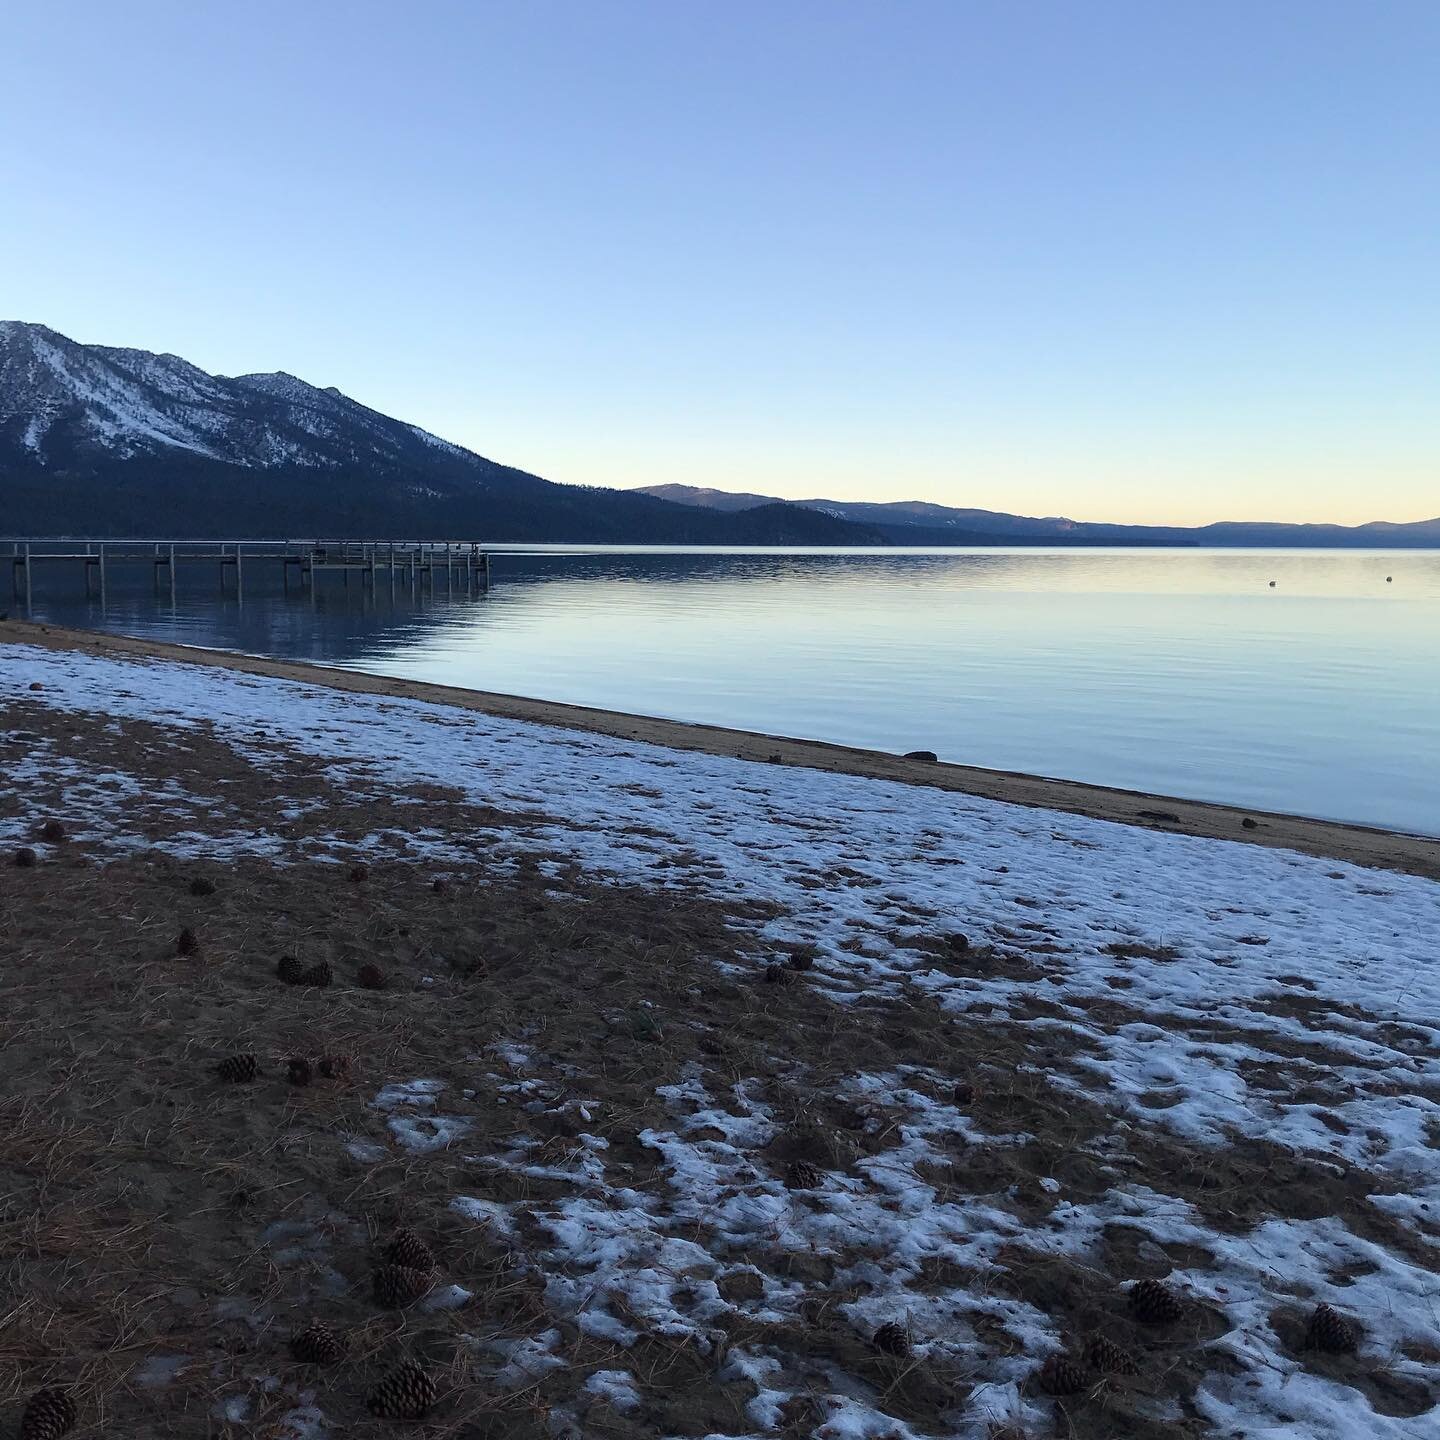 Each day, I venture outside before the sun falls behind the mountains. I want to impress upon my mind that last bit of light.⁣
⁣
Craving the sound of water brushing over sand, I walked to the lake. It was cold. Quiet. An empty beach. I walked along t